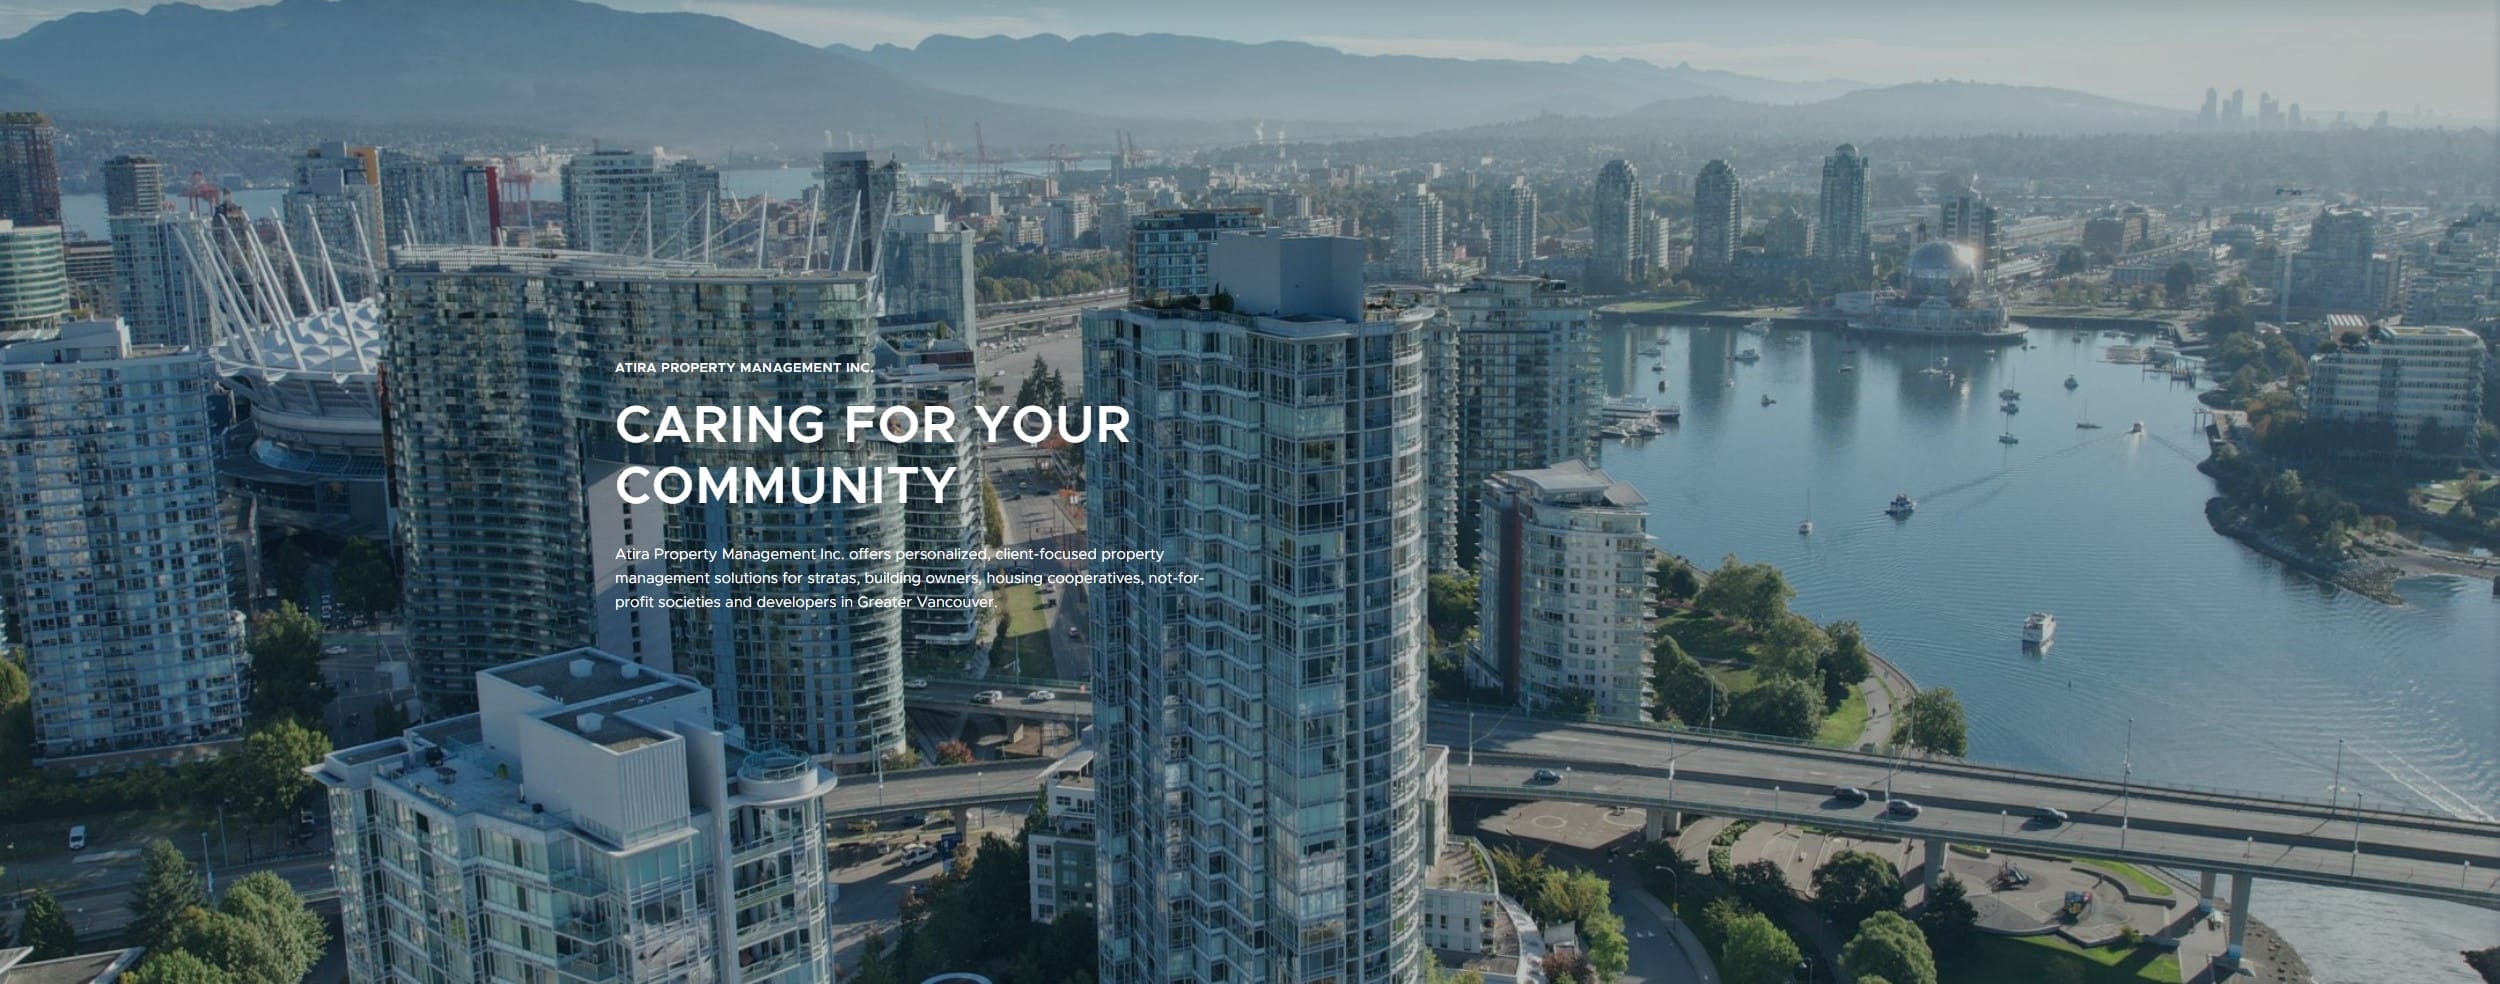 PMI banner - Vancouver from the air